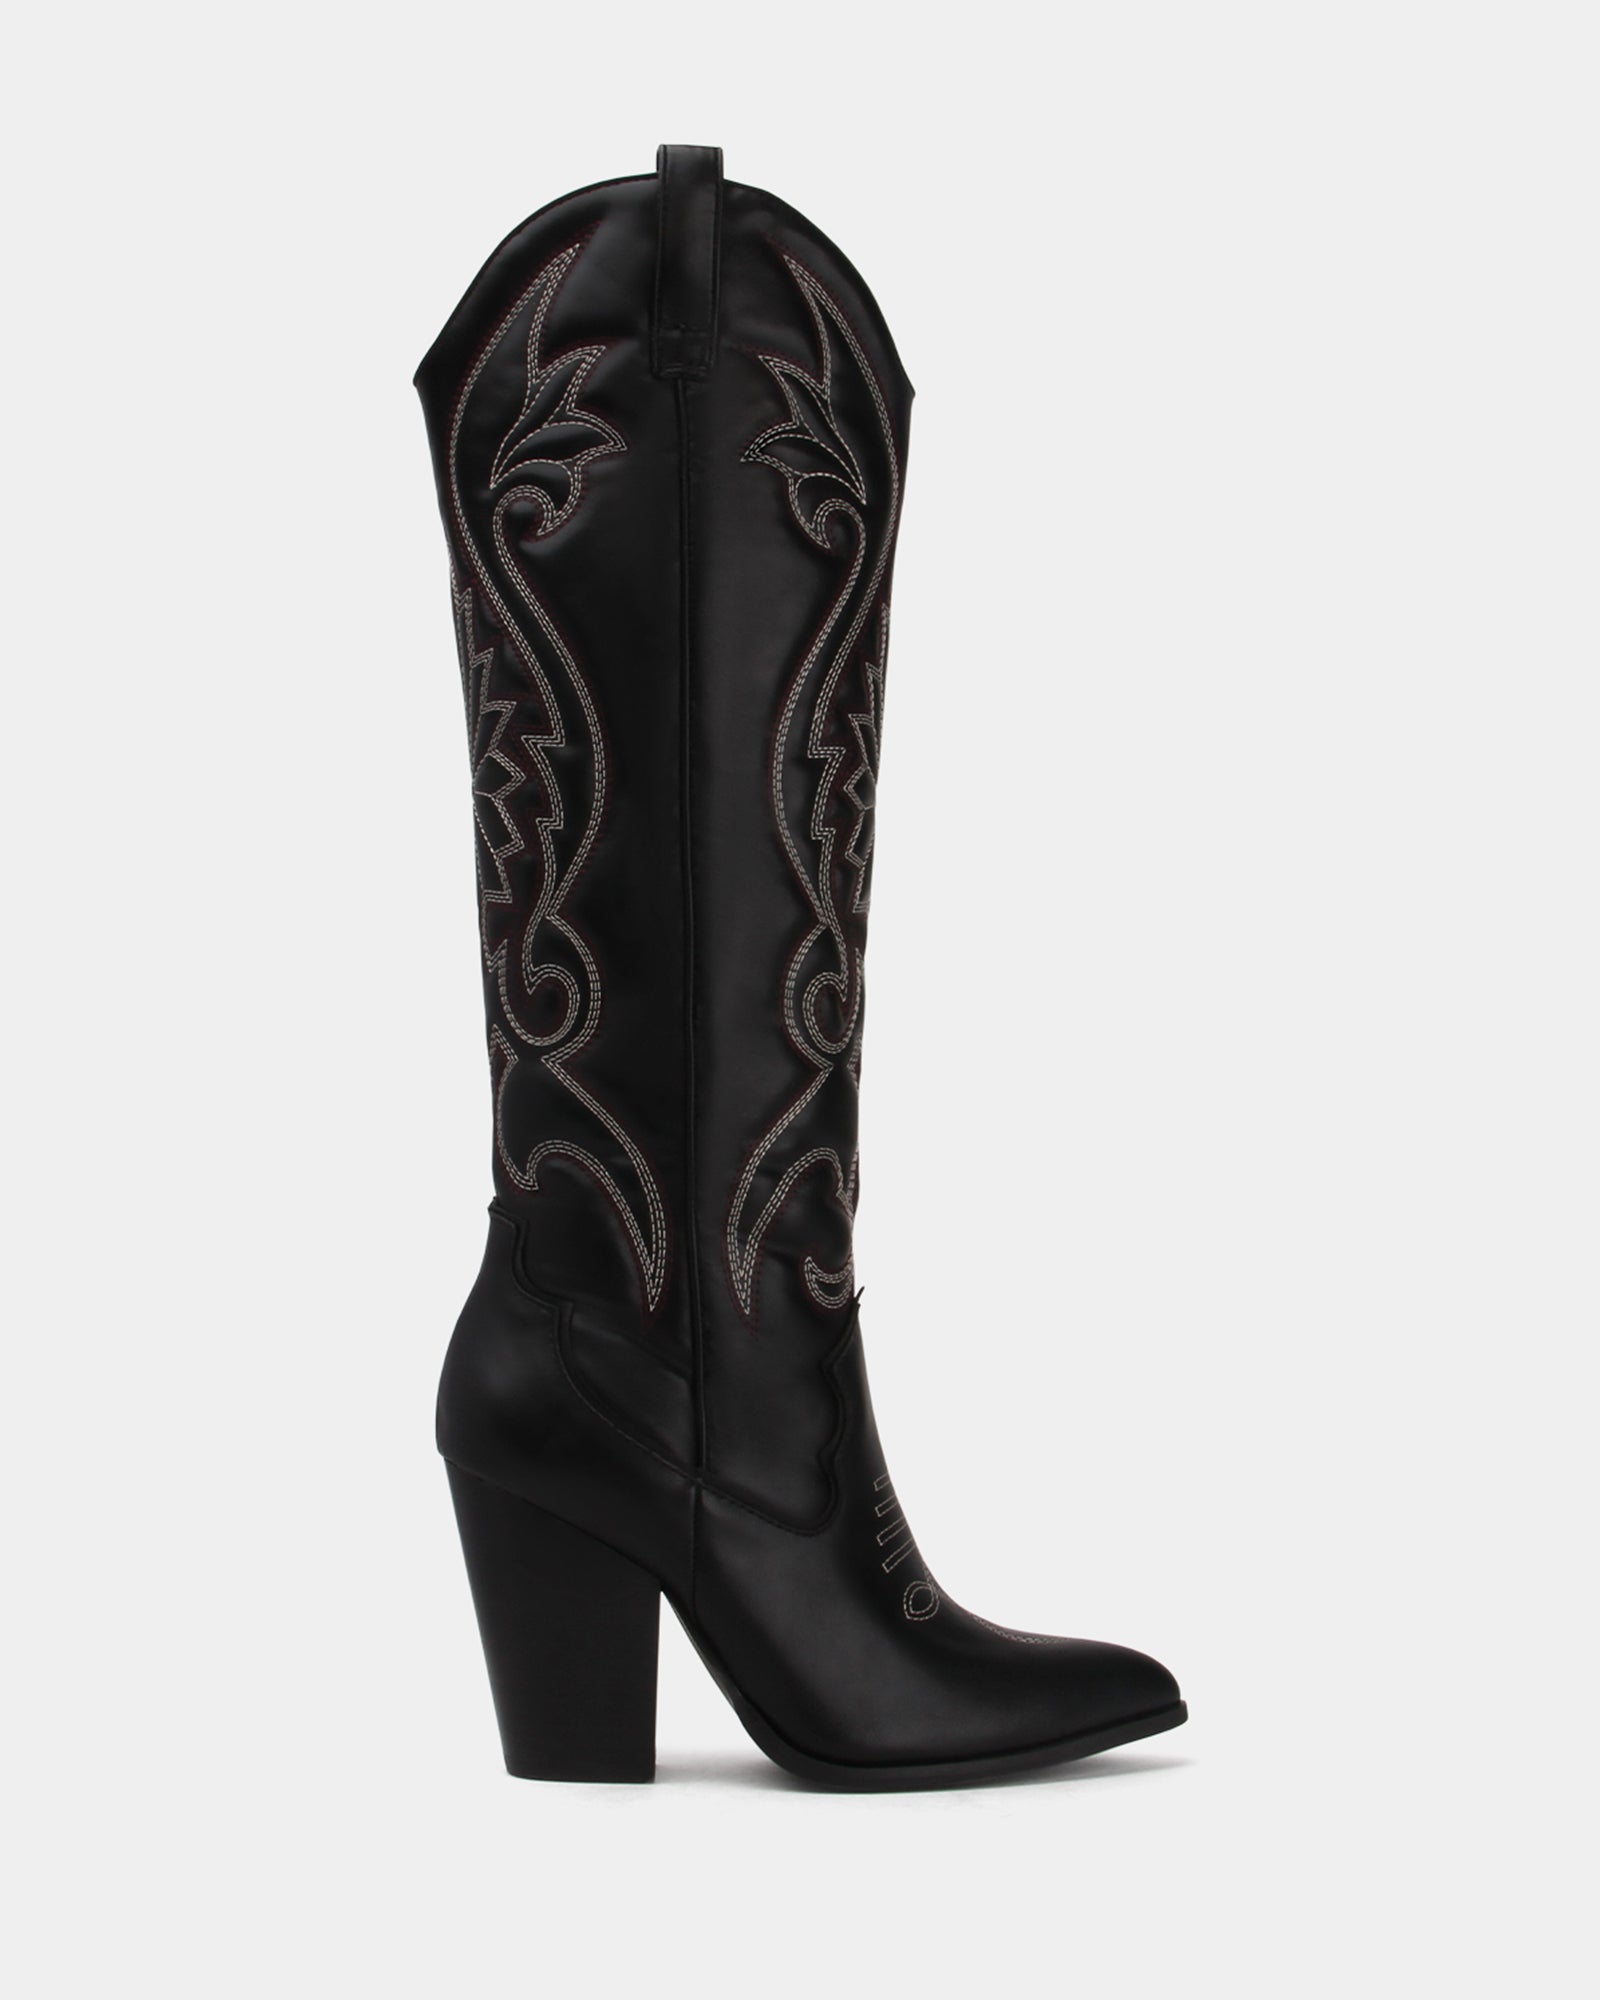 Buy DIEGO Tall Western Boots by Betts online - Betts